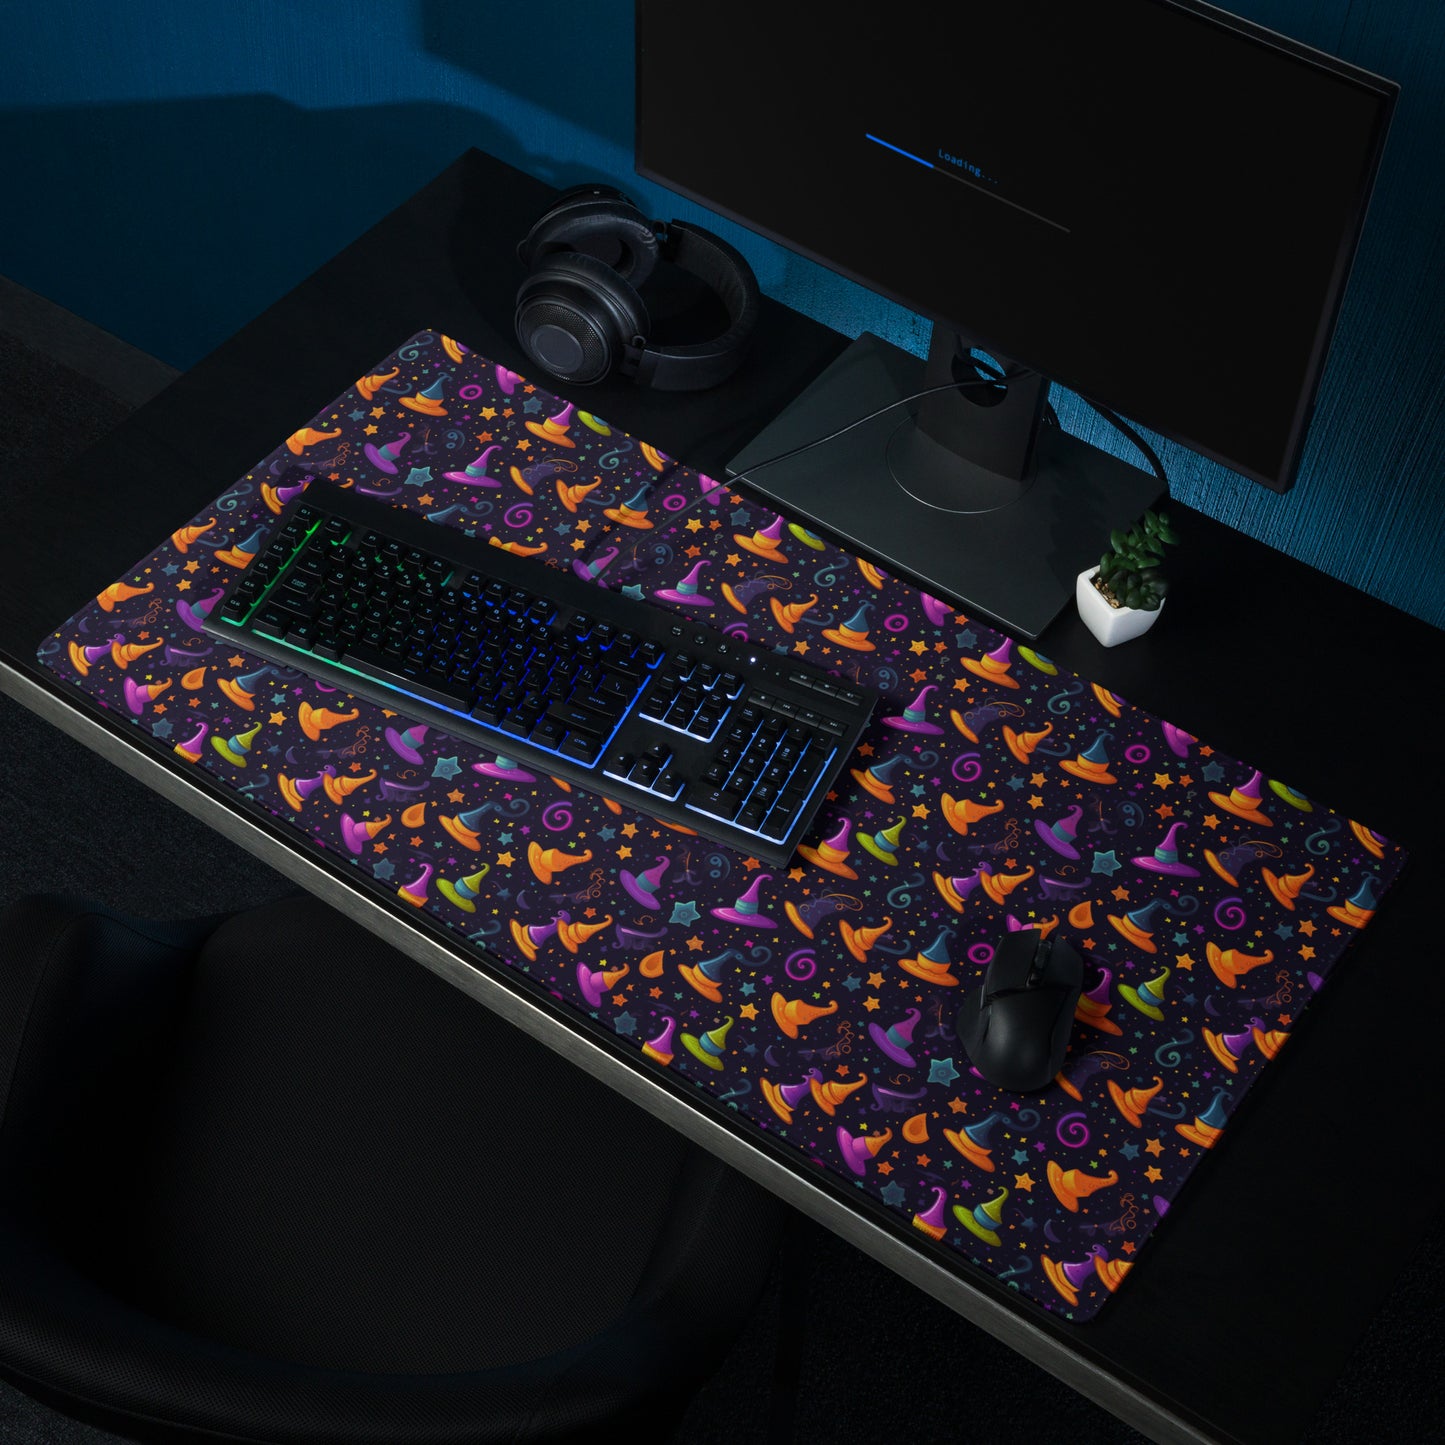 A 36" x 18" desk pad with a orange and purple wizard hat pattern sitting on a desk.